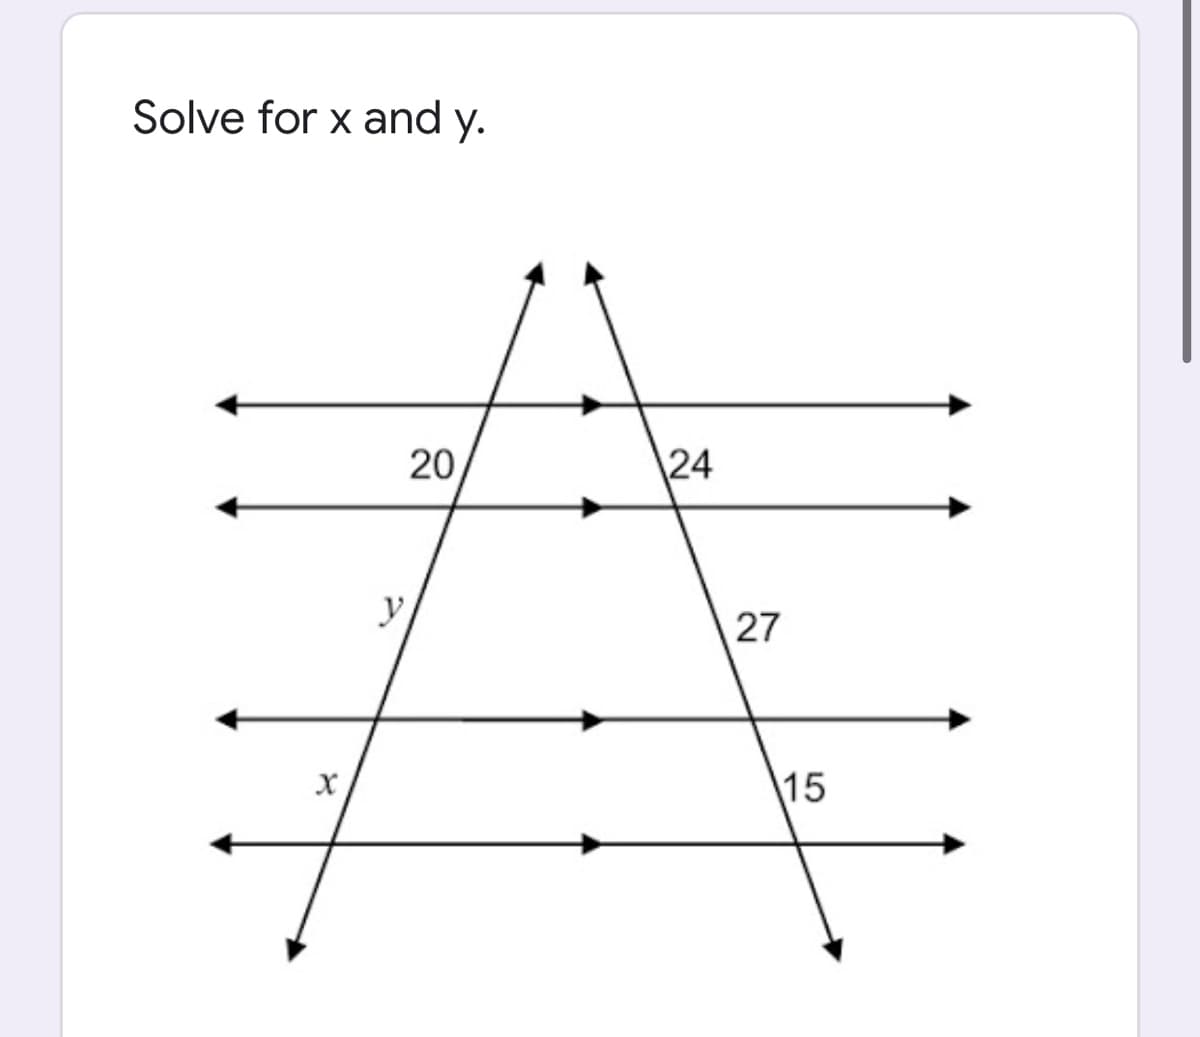 Solve for x and y.
20
24
y
27
15
